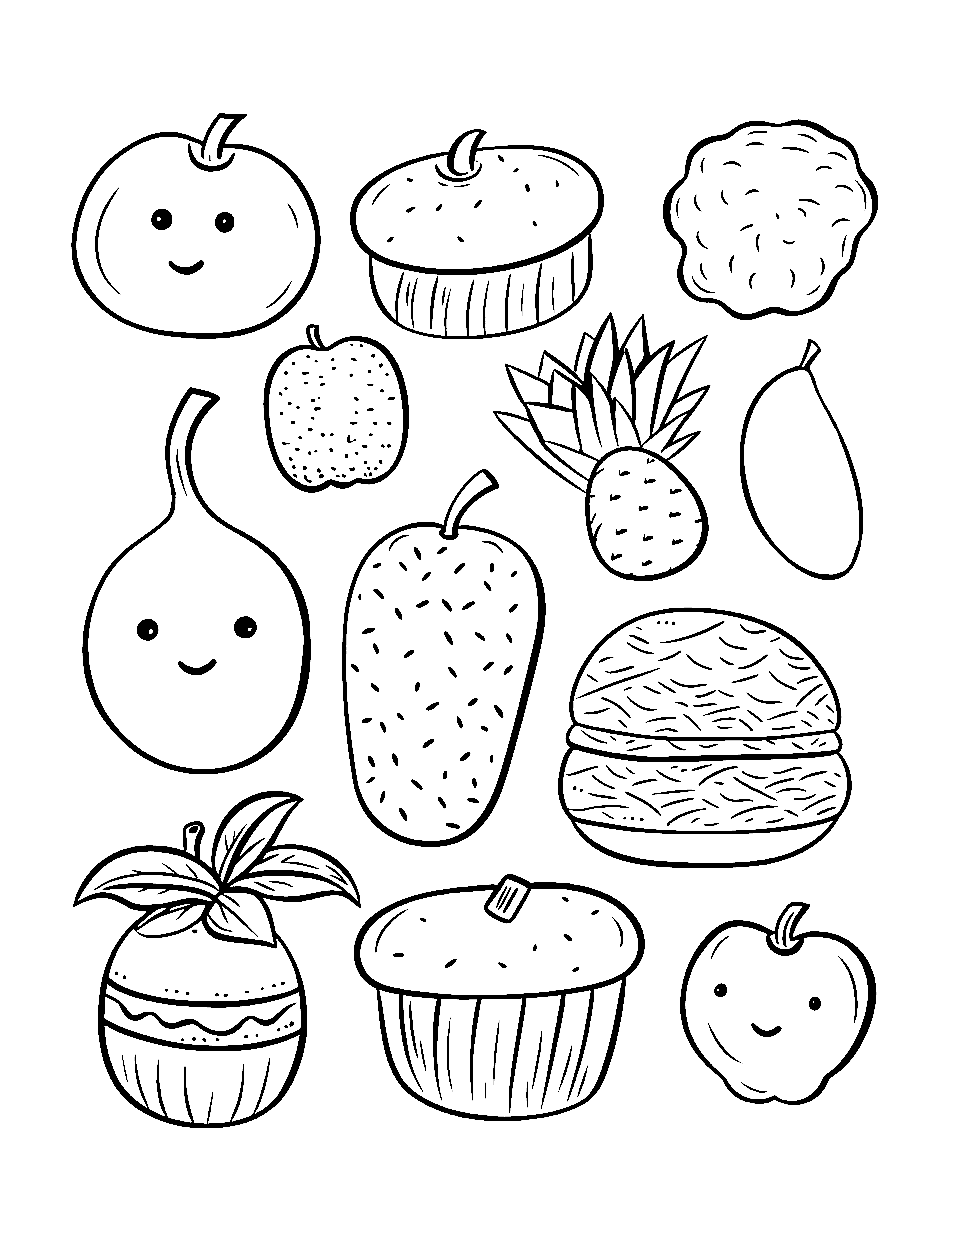 Food coloring pages free printable sheets